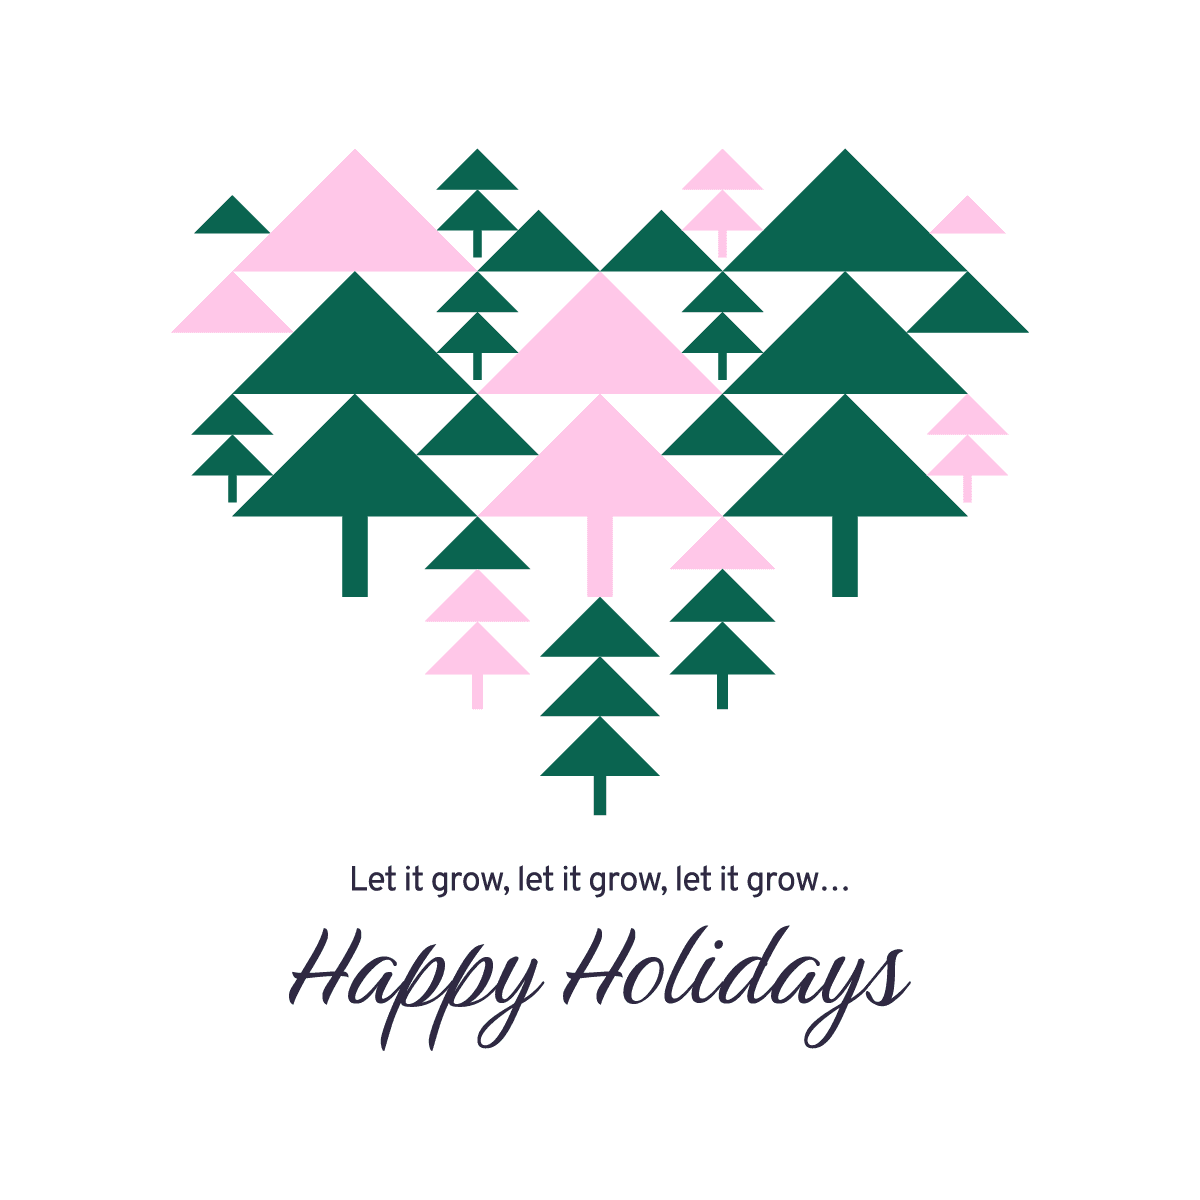 Simplified visual of coniferous trees with the text "Let it grow, let it grow, let it grow" and "Happy Holidays".